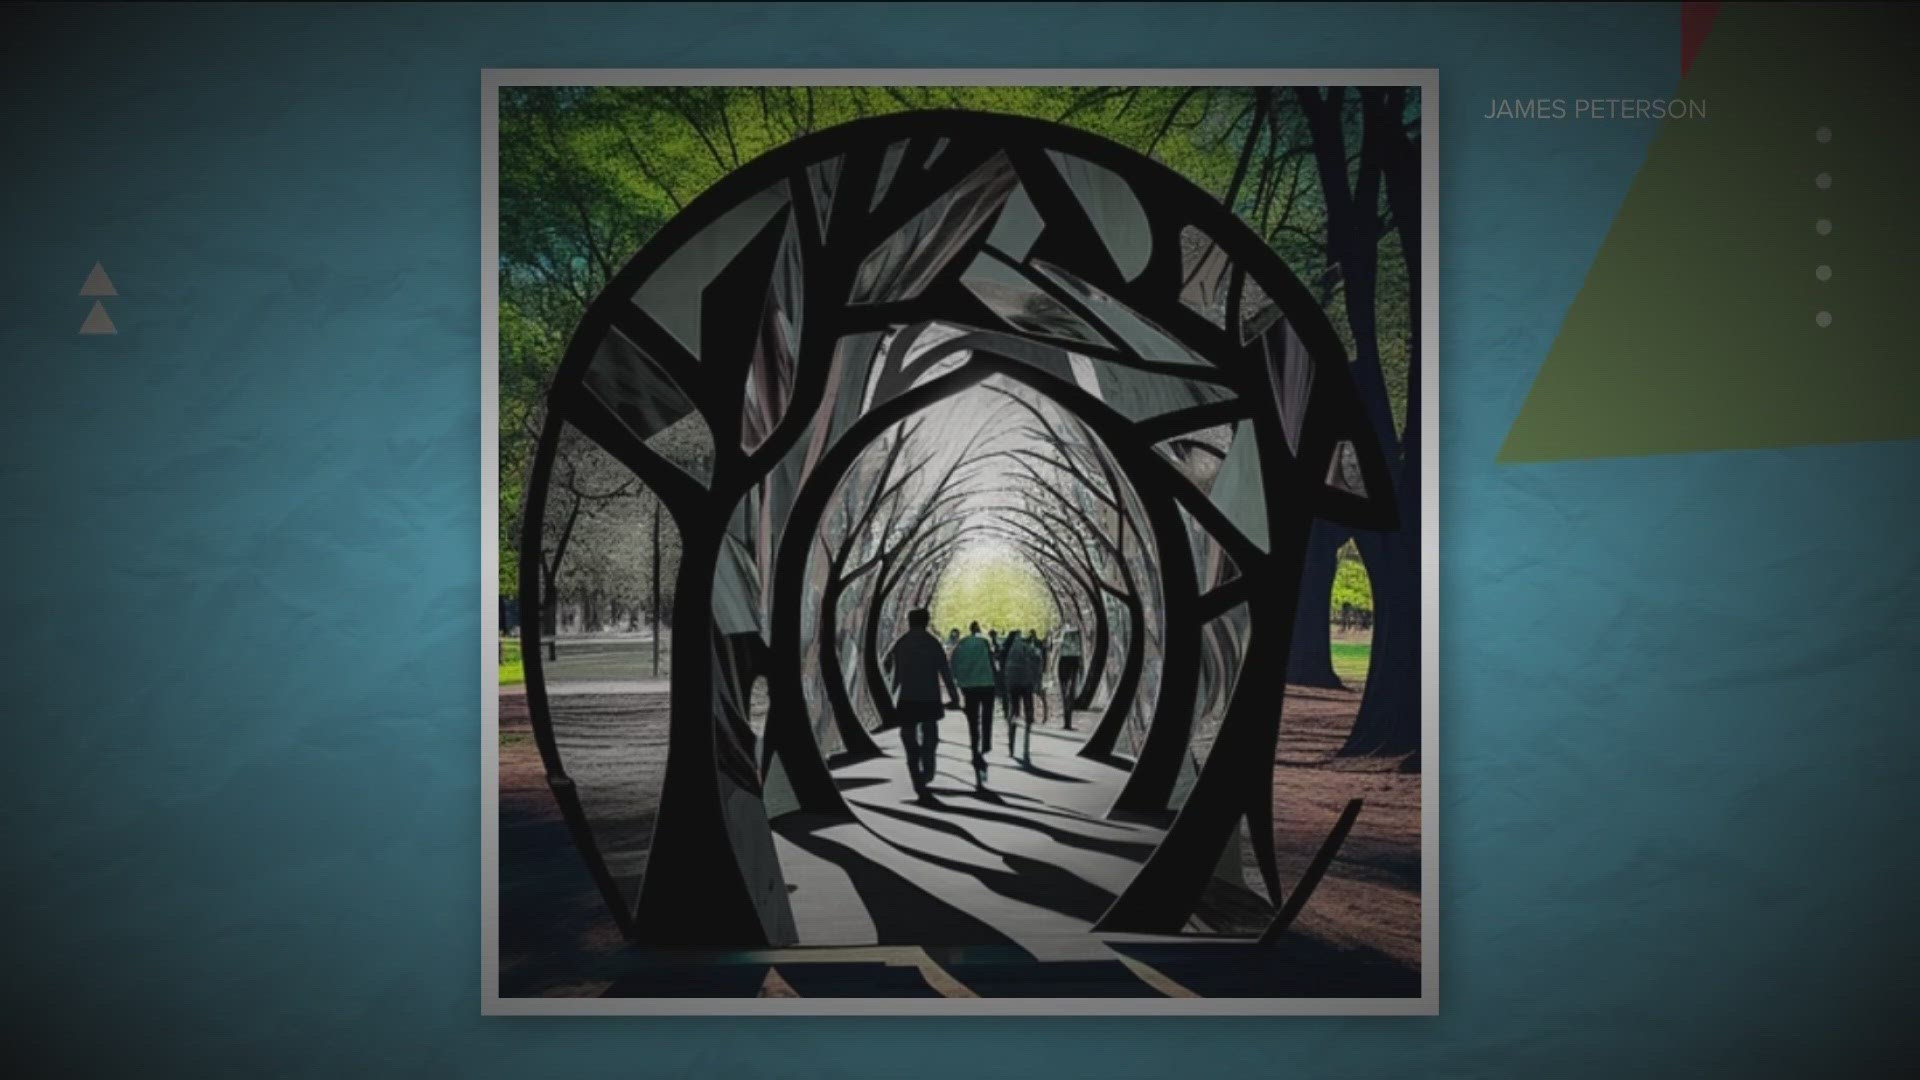 Artist James Peterson asks for community input on new sculpture being built in Redwood Park.